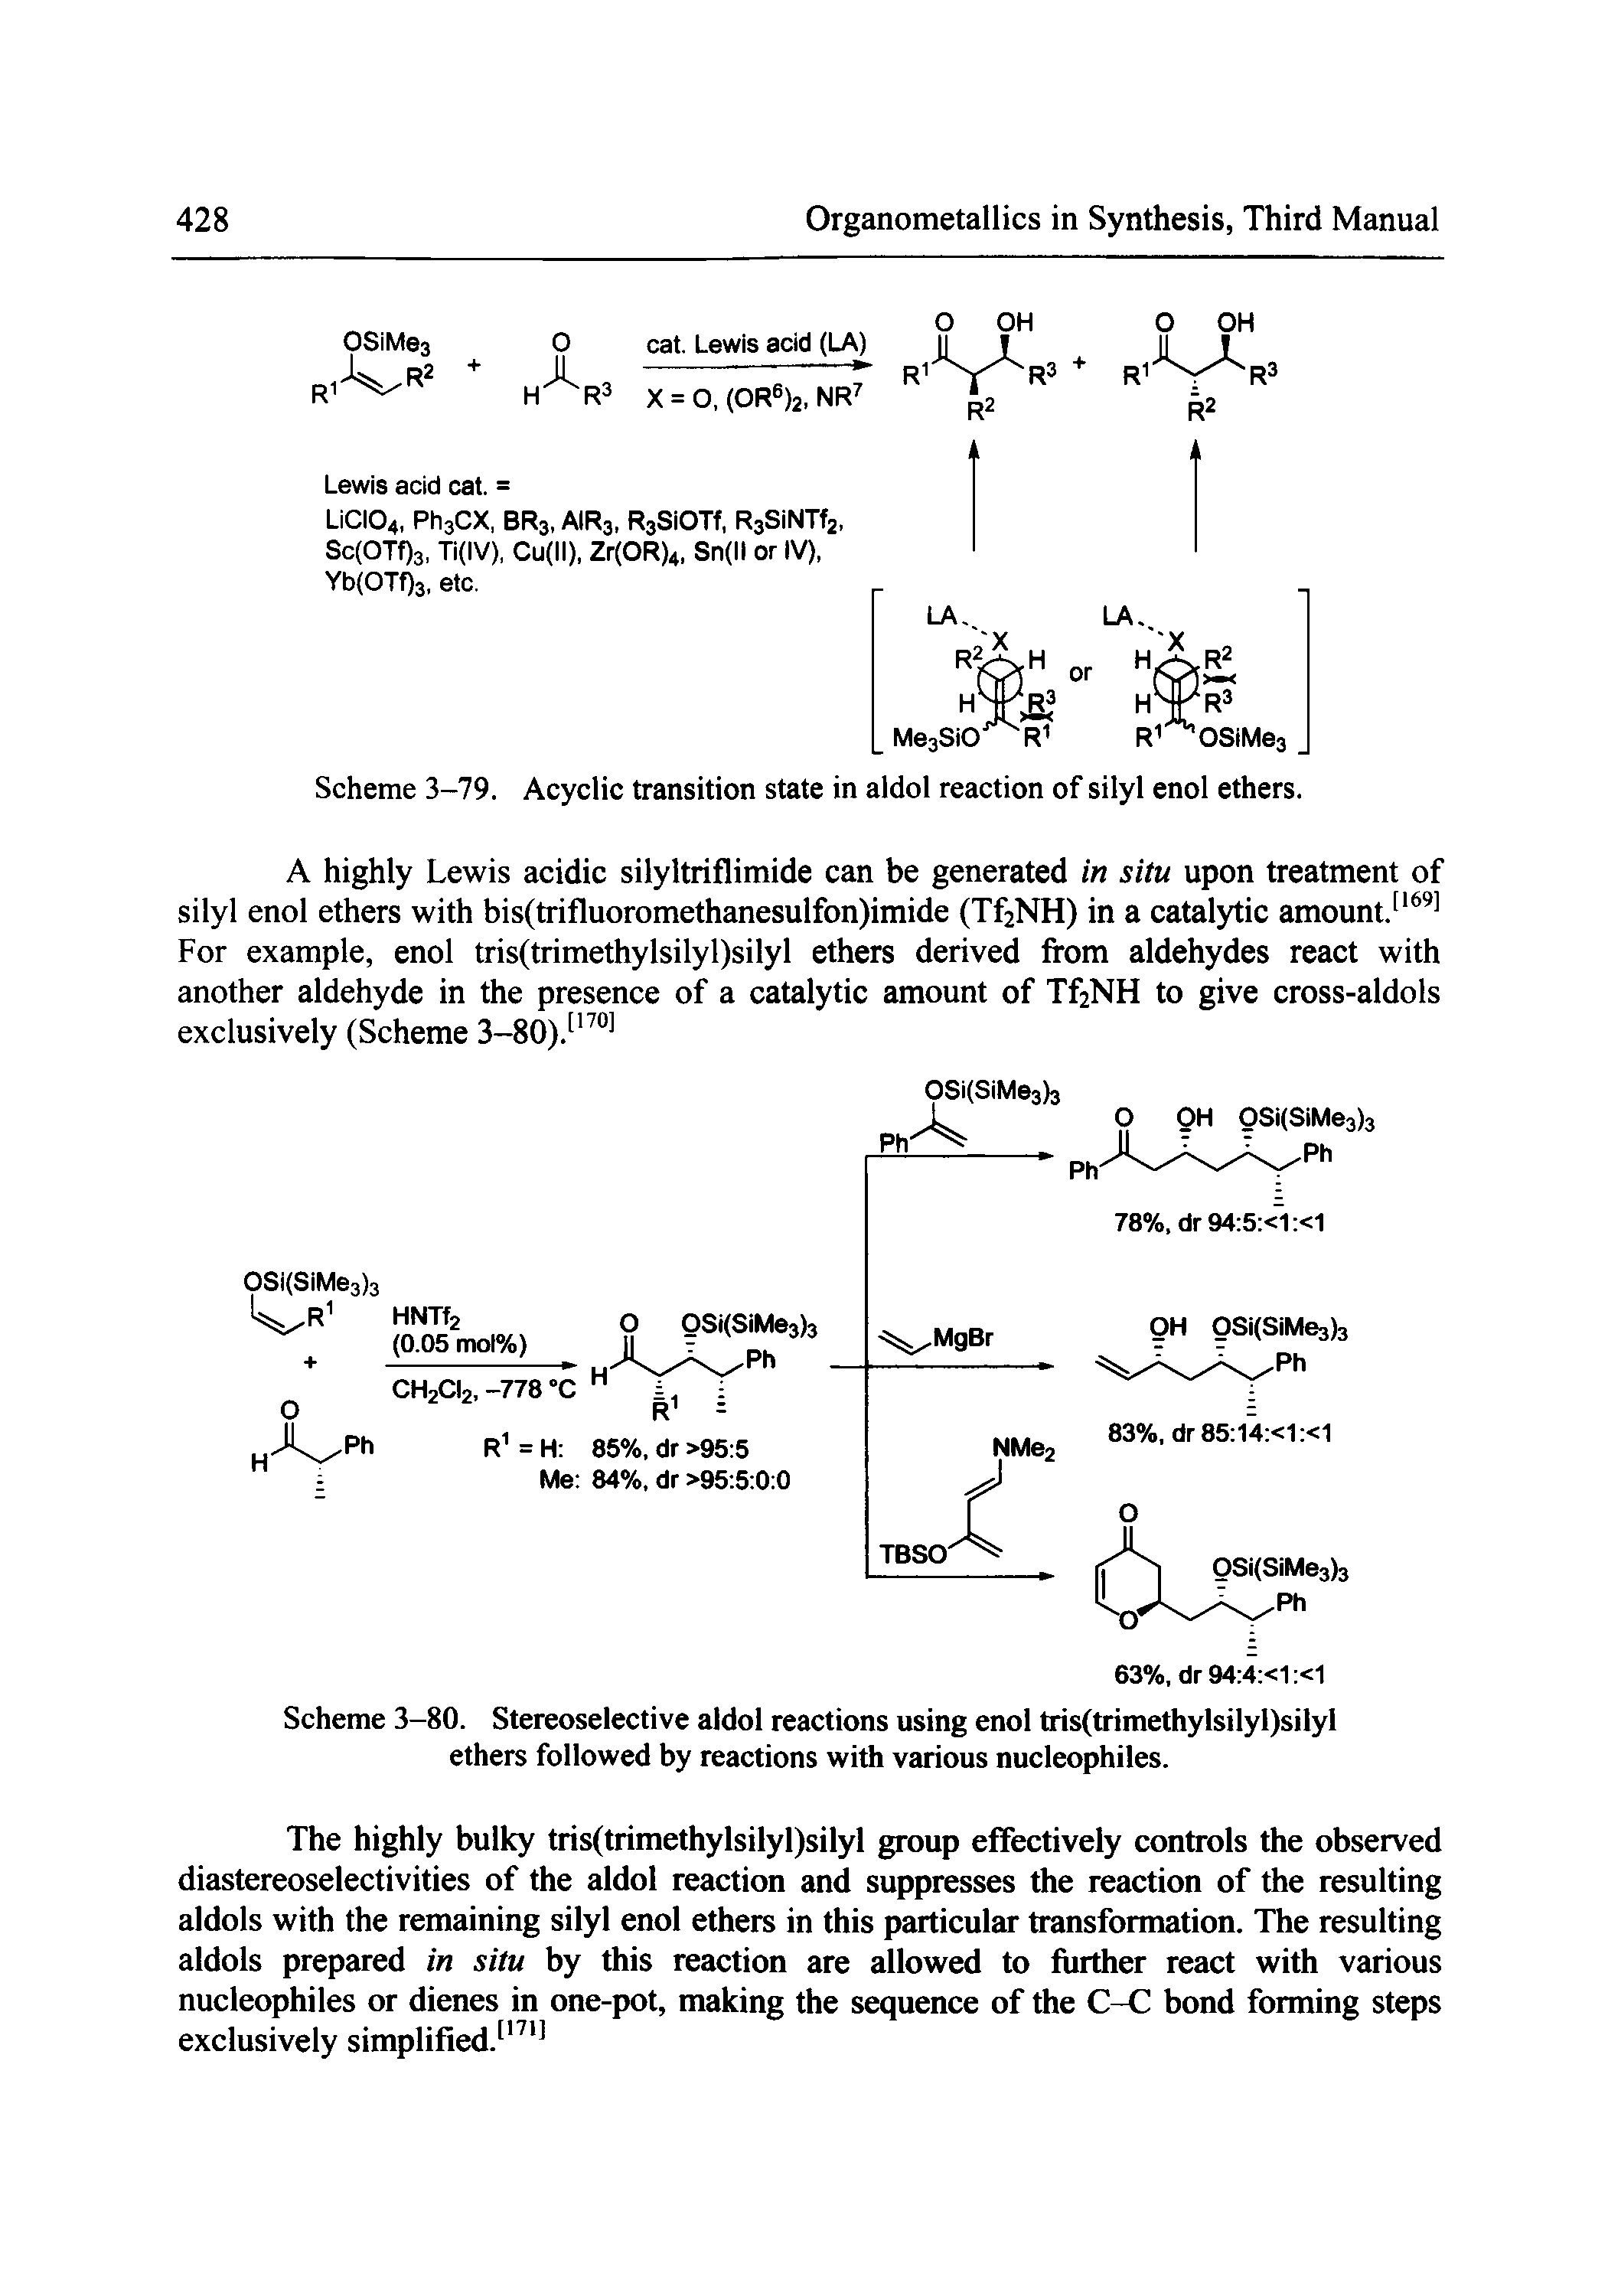 Scheme 3-80. Stereoselective aldol reactions using enol tris(trimethylsilyl)silyl ethers followed by reactions with various nucleophiles.